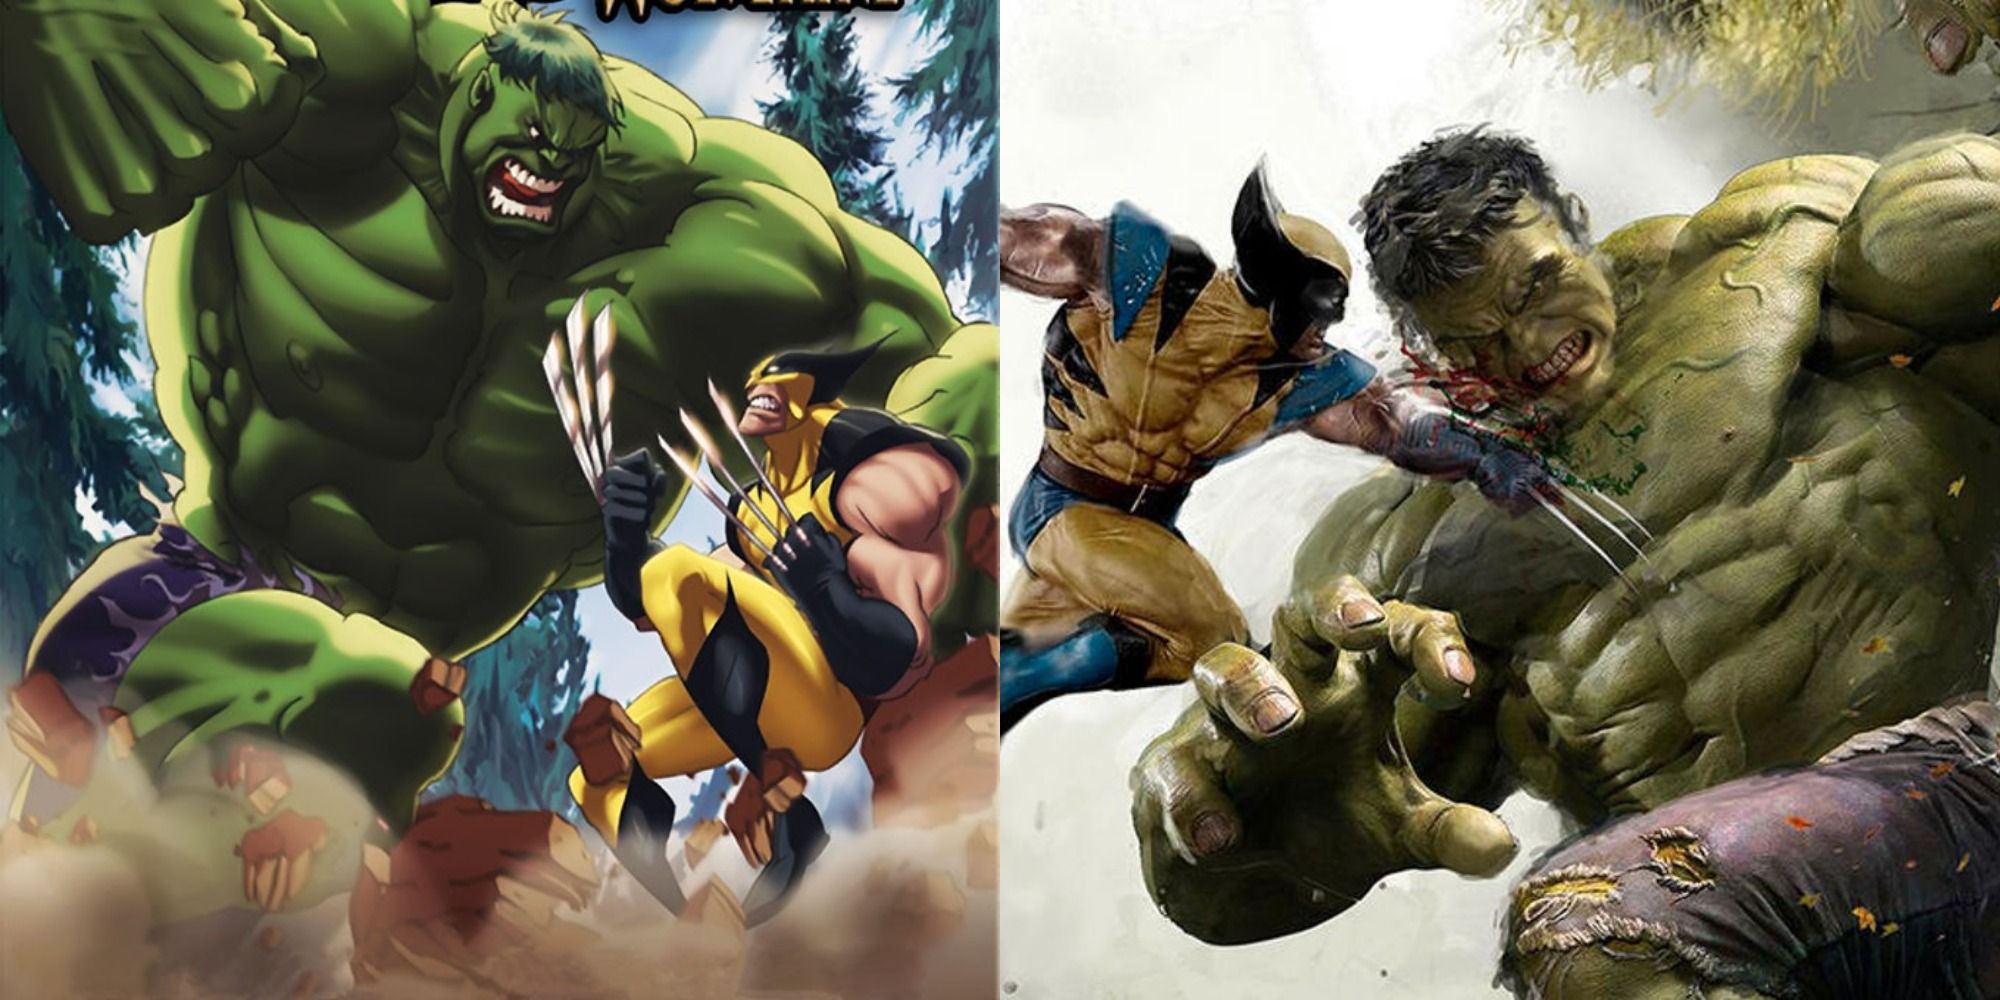 Split image of a cartoon version of Wolverine battling Hulk and the Marvel Comics versions of the heroes.